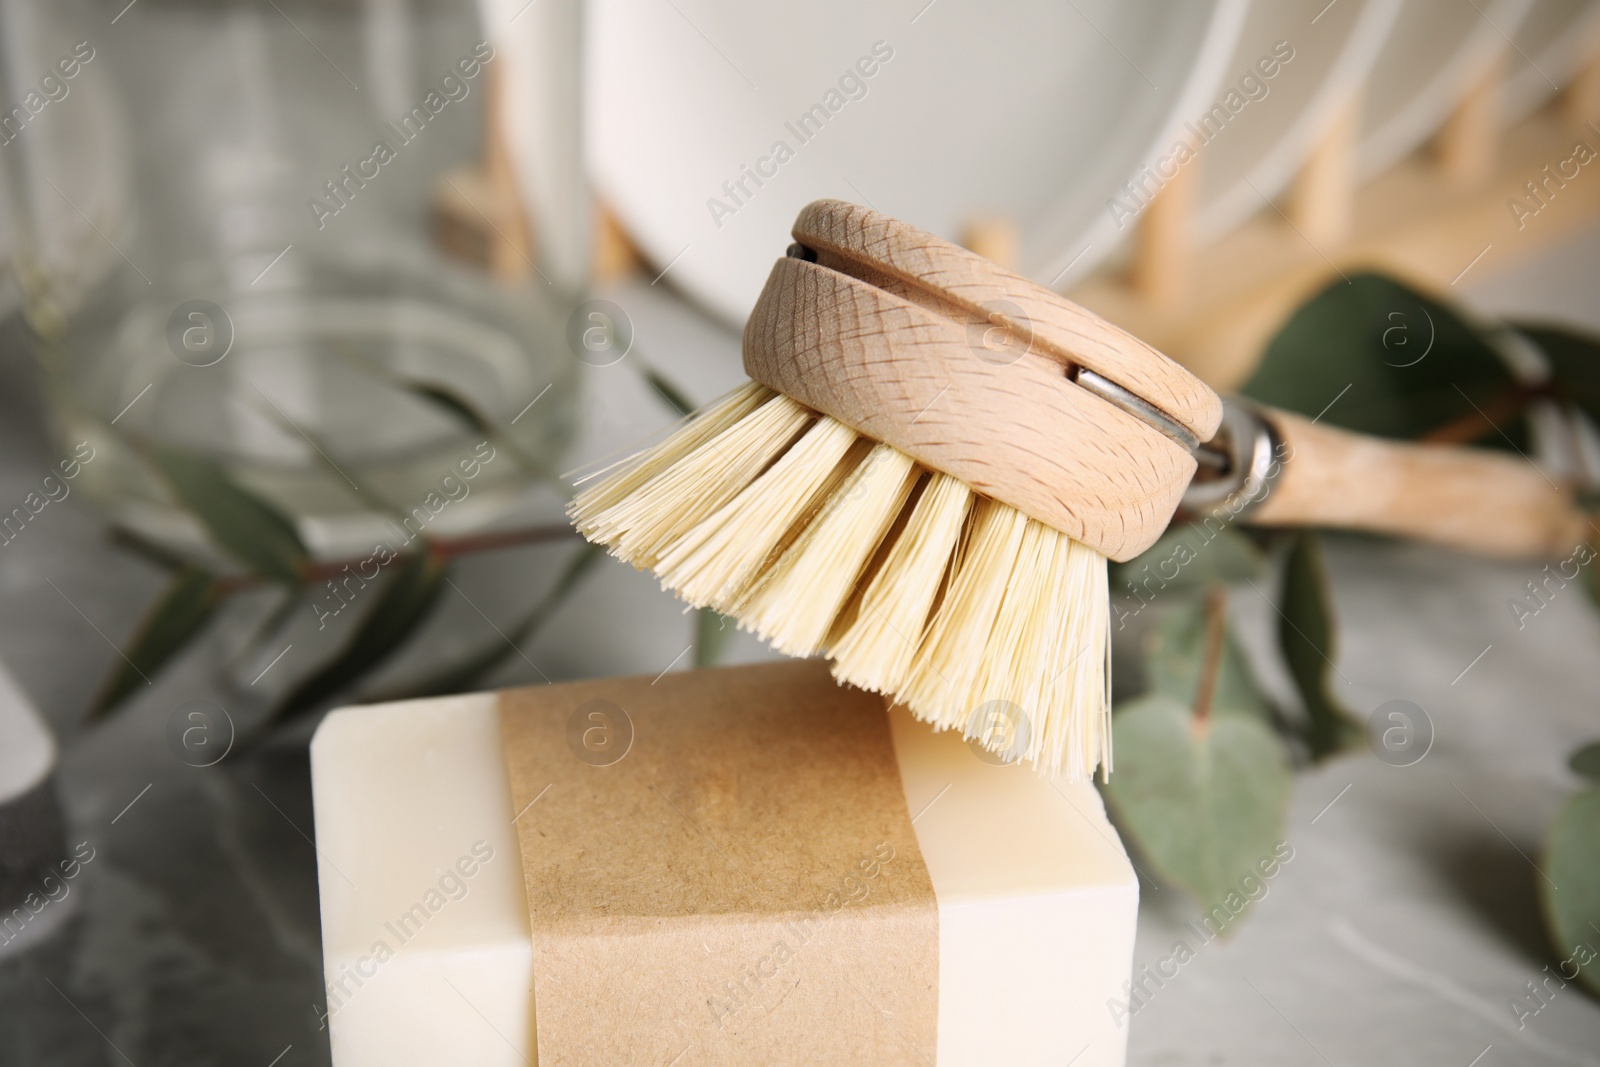 Photo of Cleaning brush and soap bar for dish washing on table, closeup